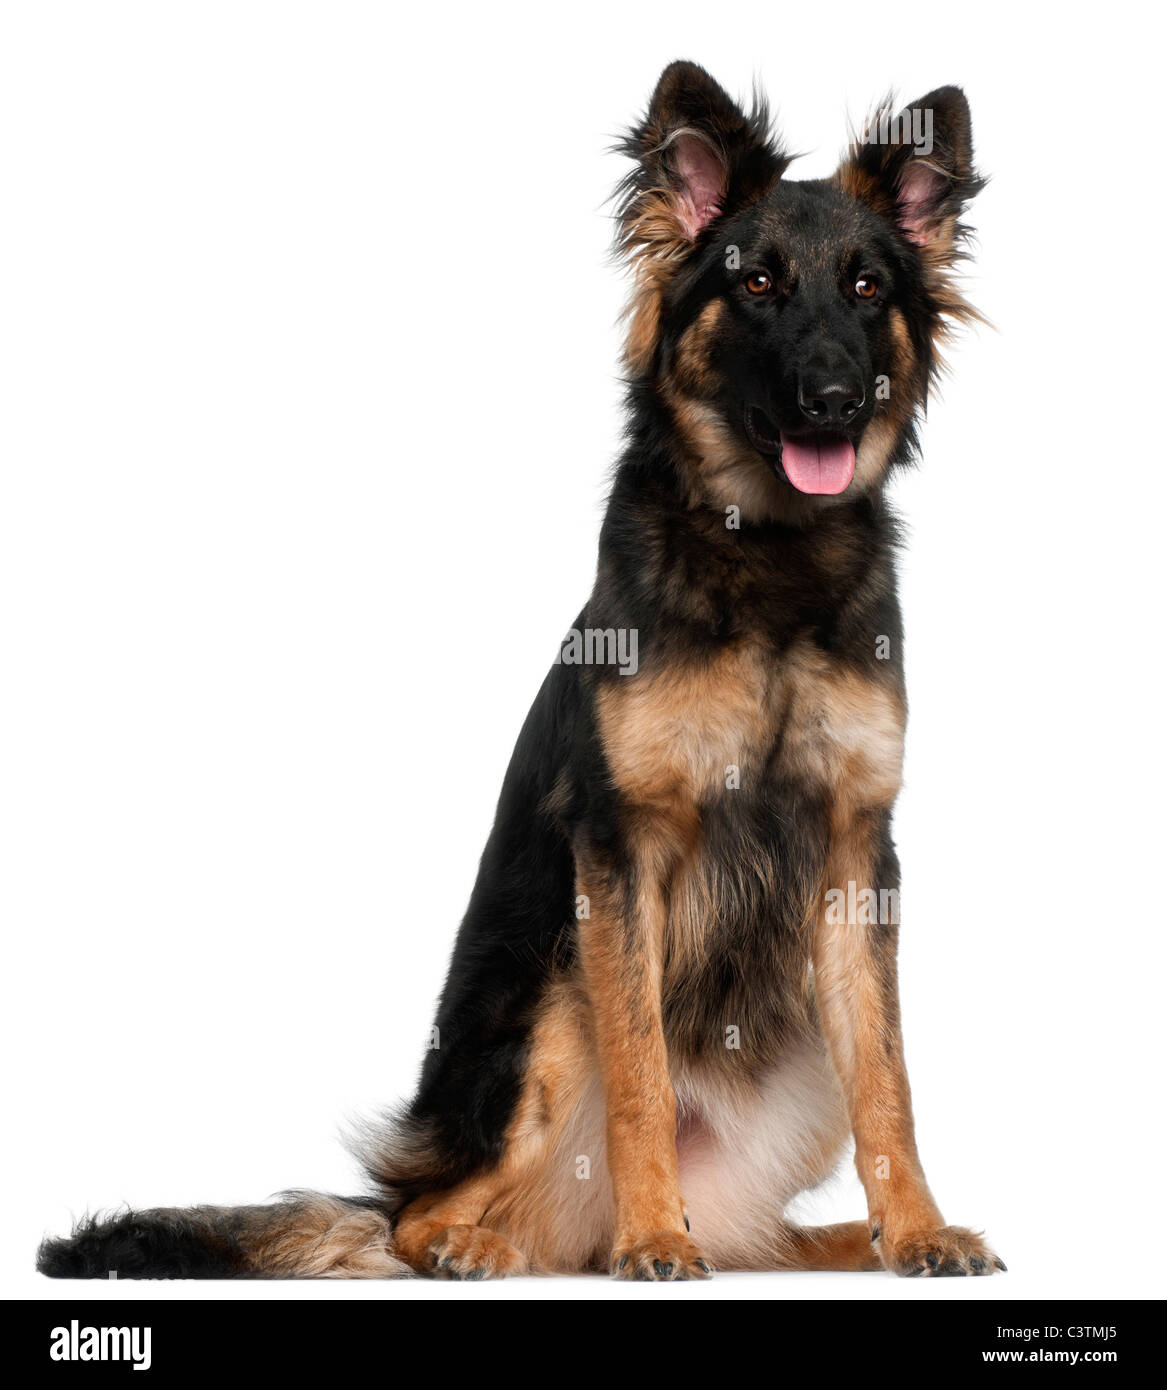 German Shepherd Dog, 8 months old, sitting in front of white background Stock Photo